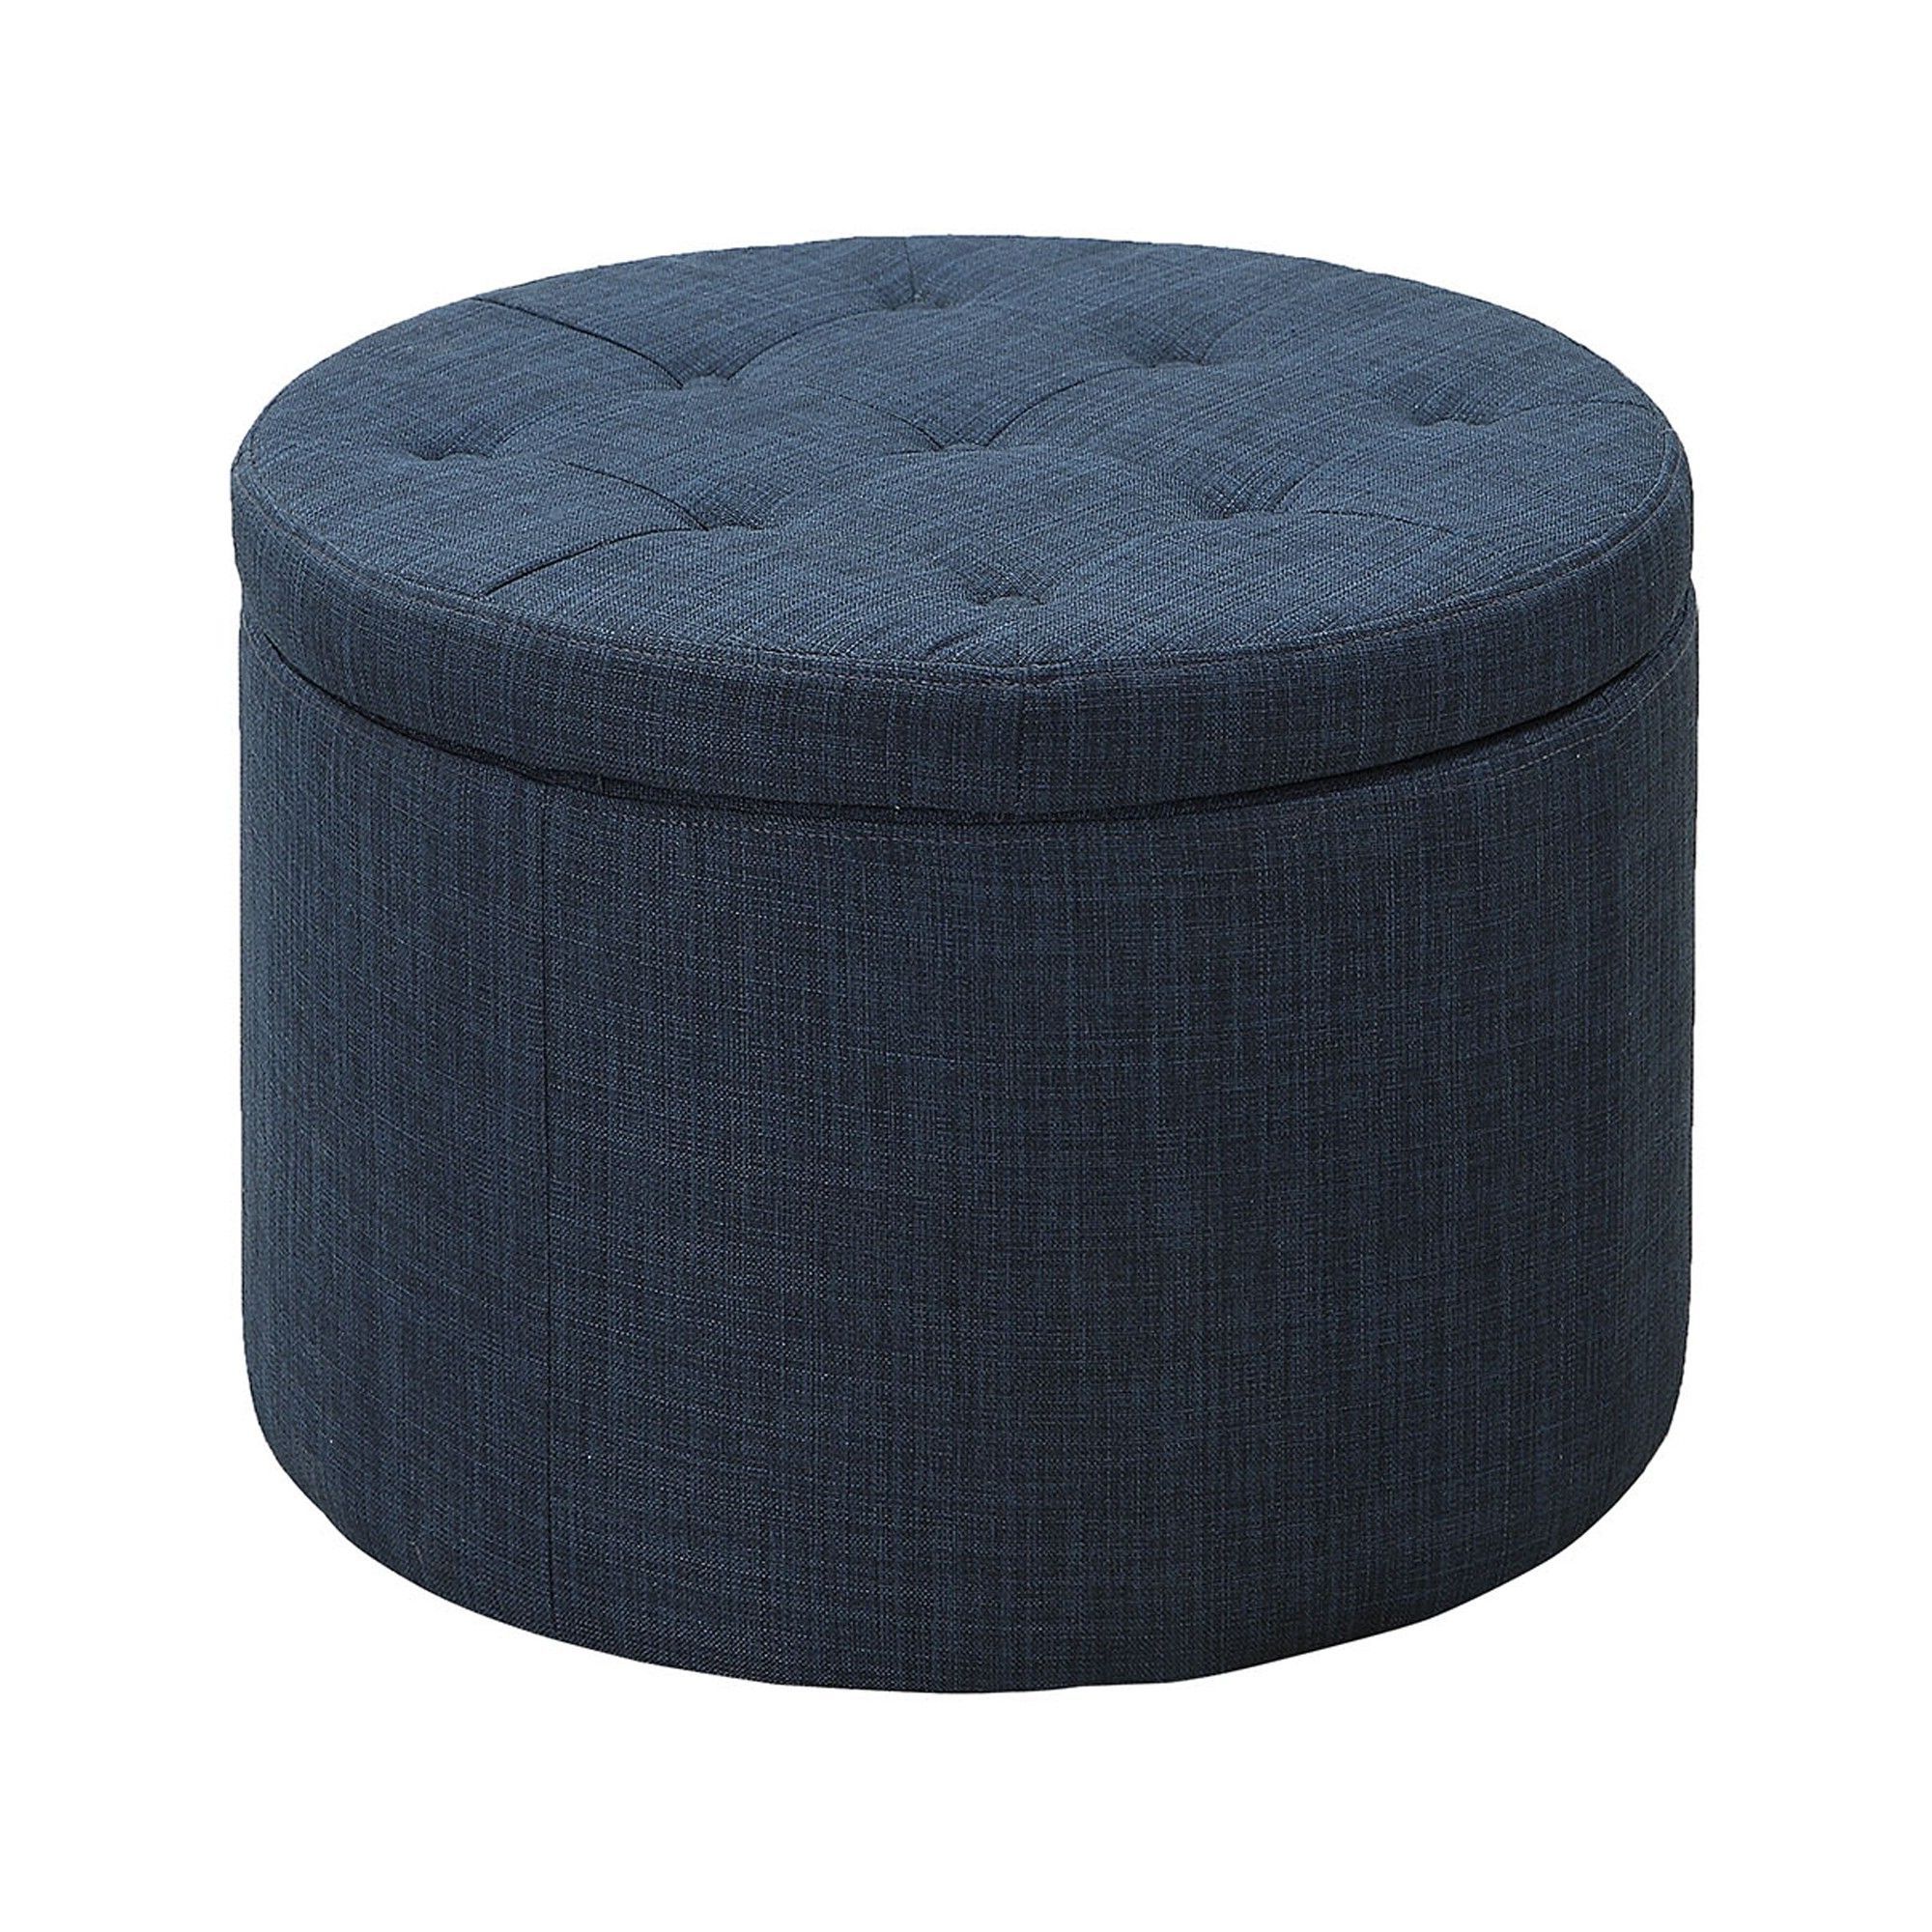 Trendy Round Shoe Ottoman Blue Fabric – Breighton Home (View 10 of 10)